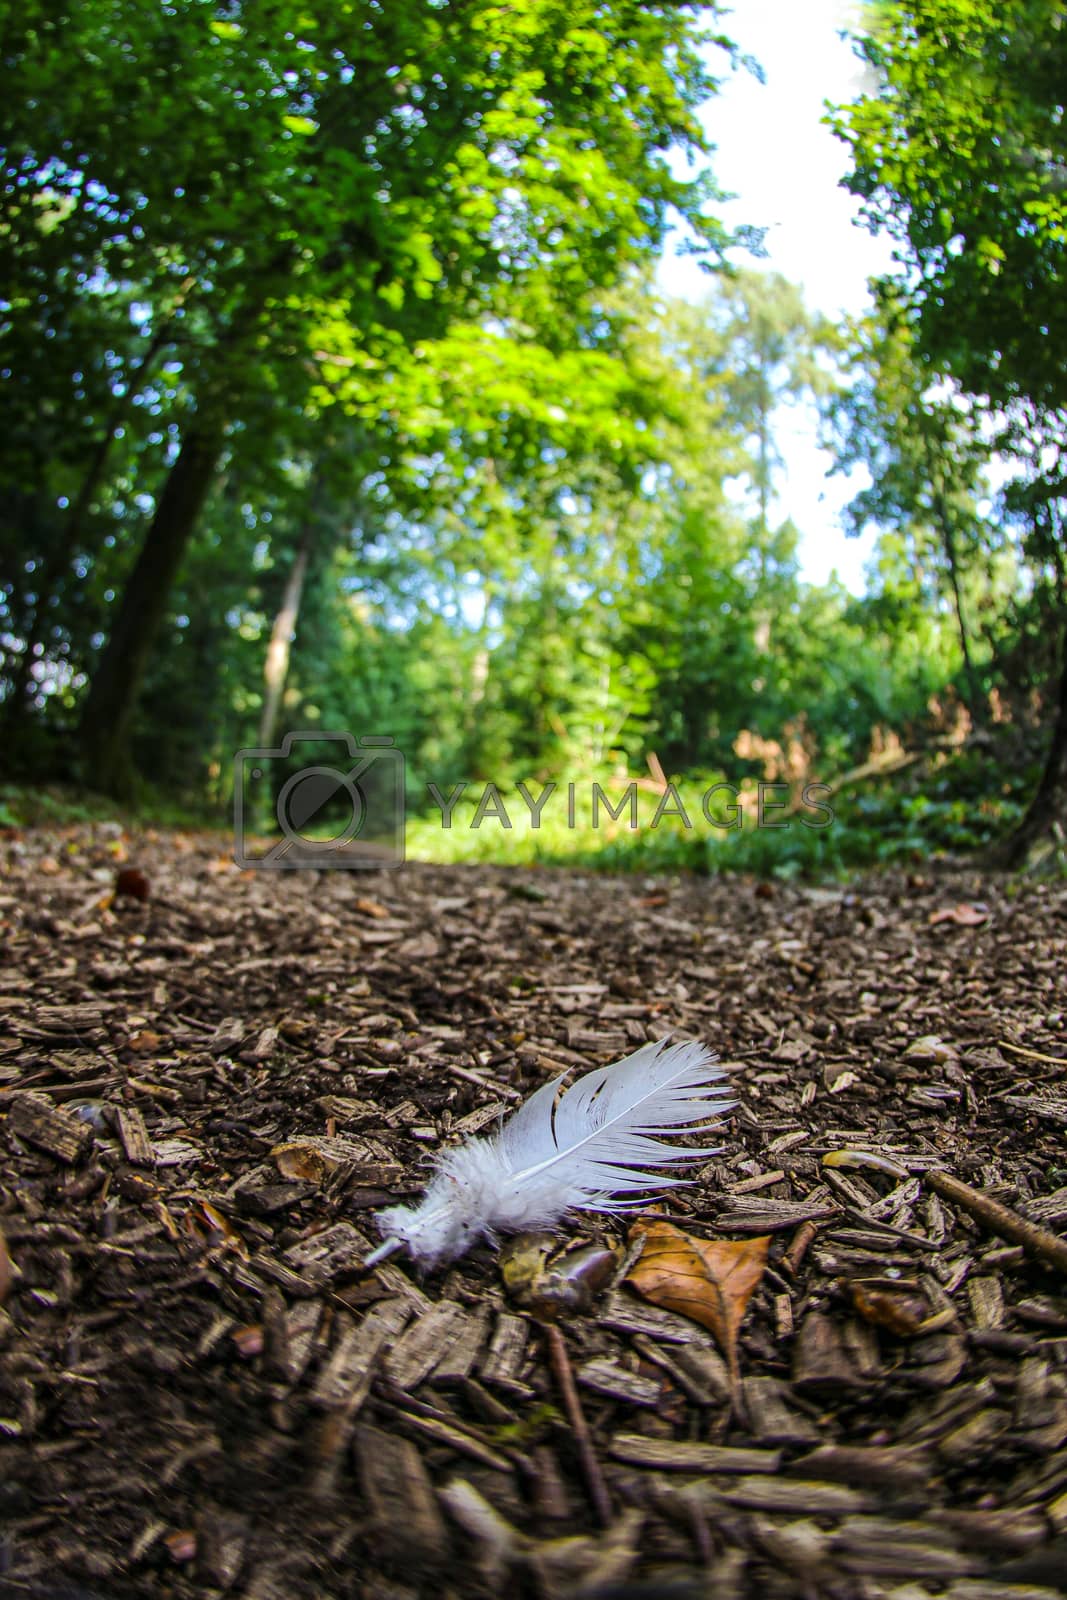 Royalty free image of Feather on ground in a green forrest area. Copy space by PeterHofstetter